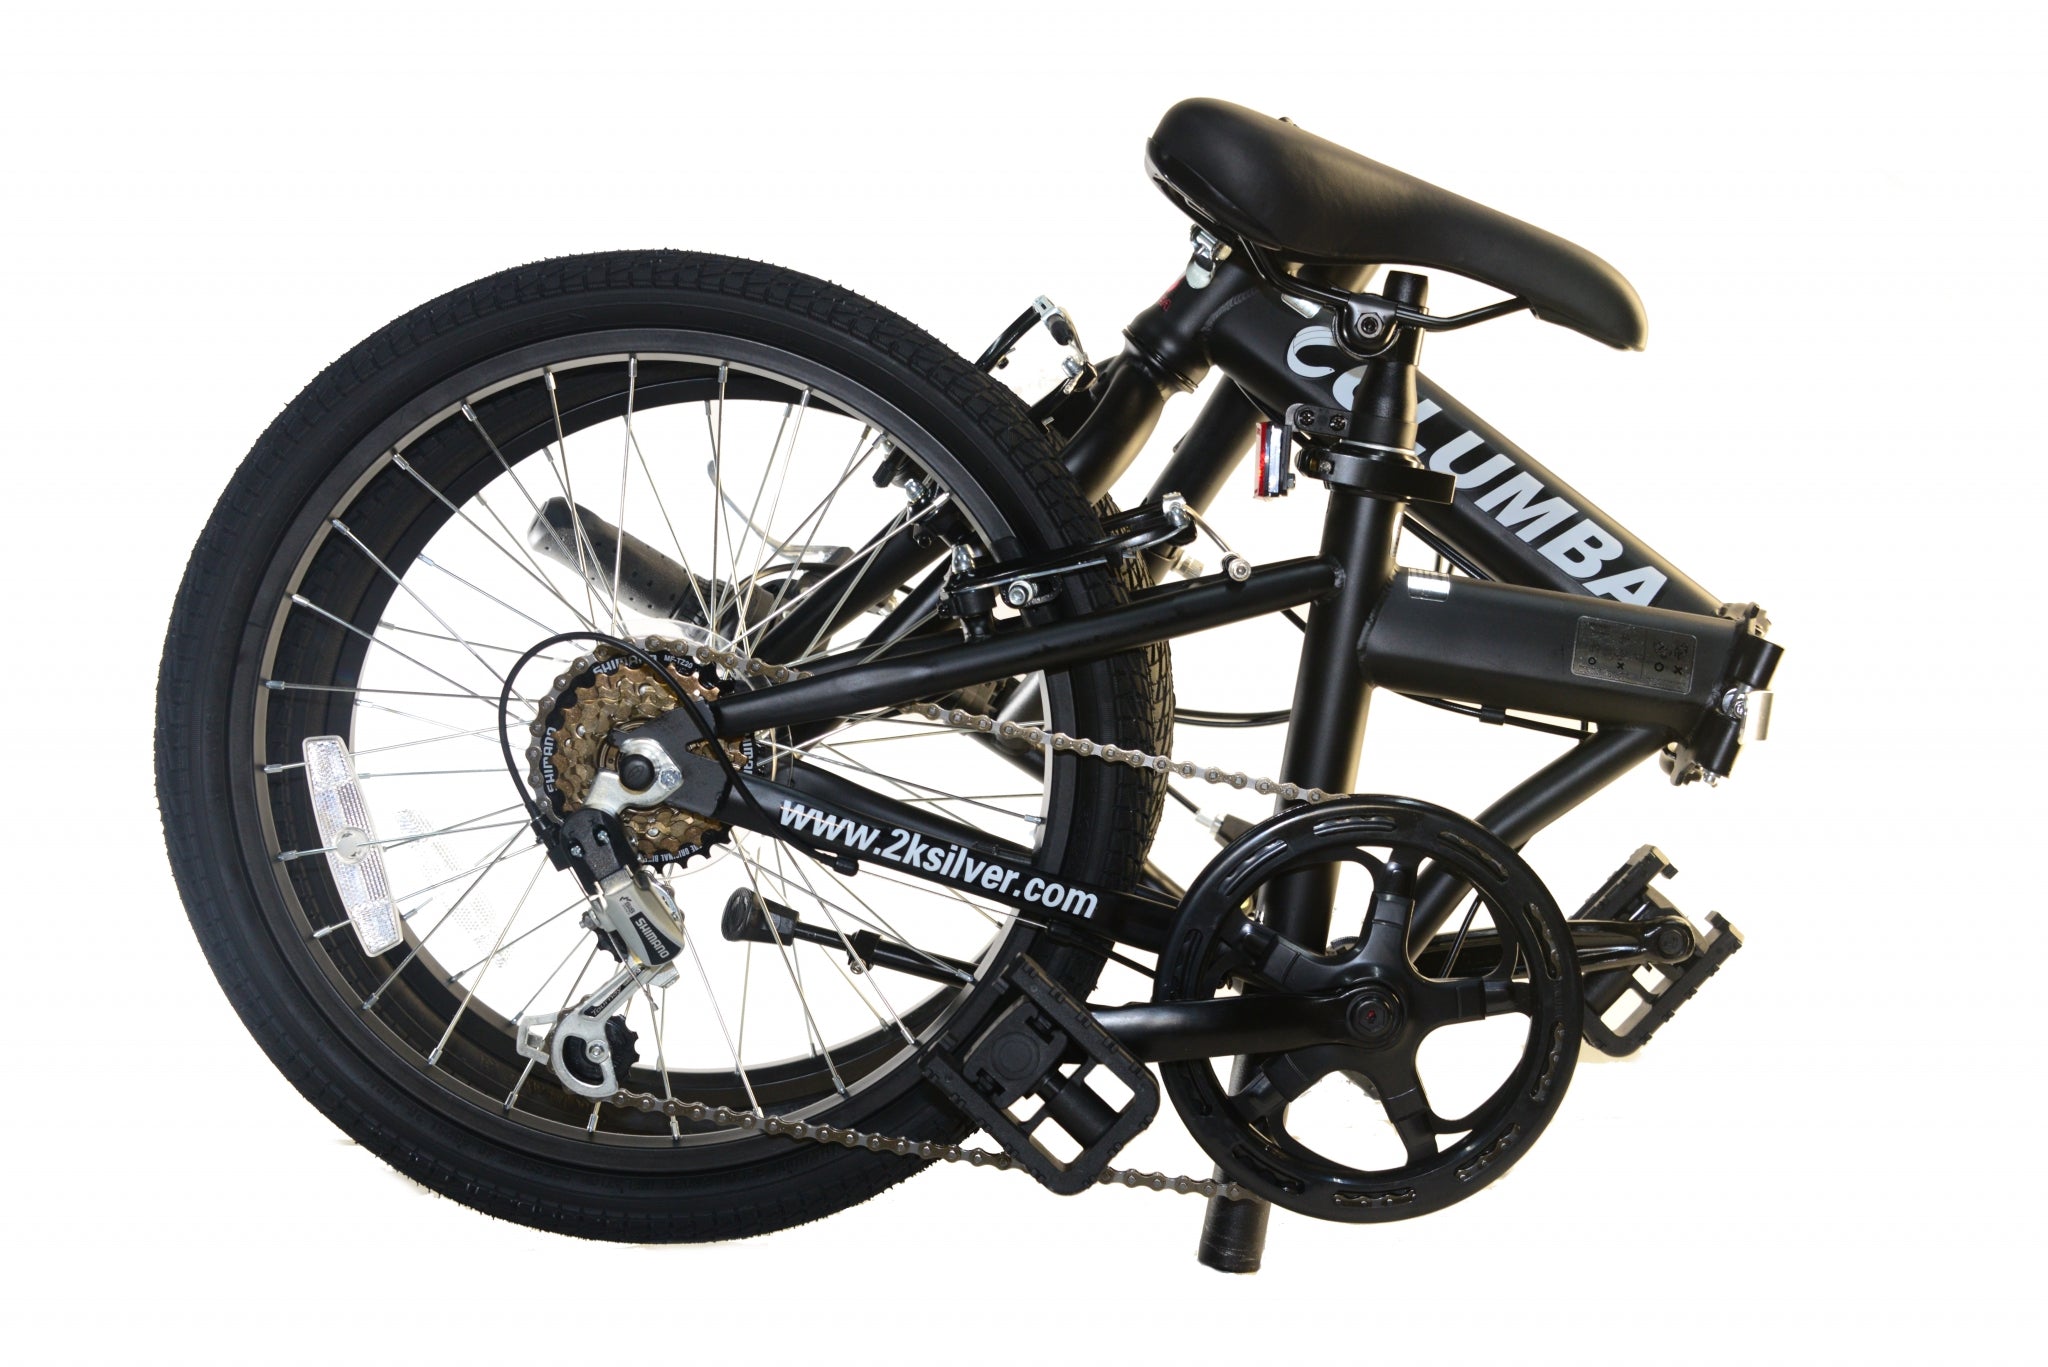 Folded position of a black folding bicycle.